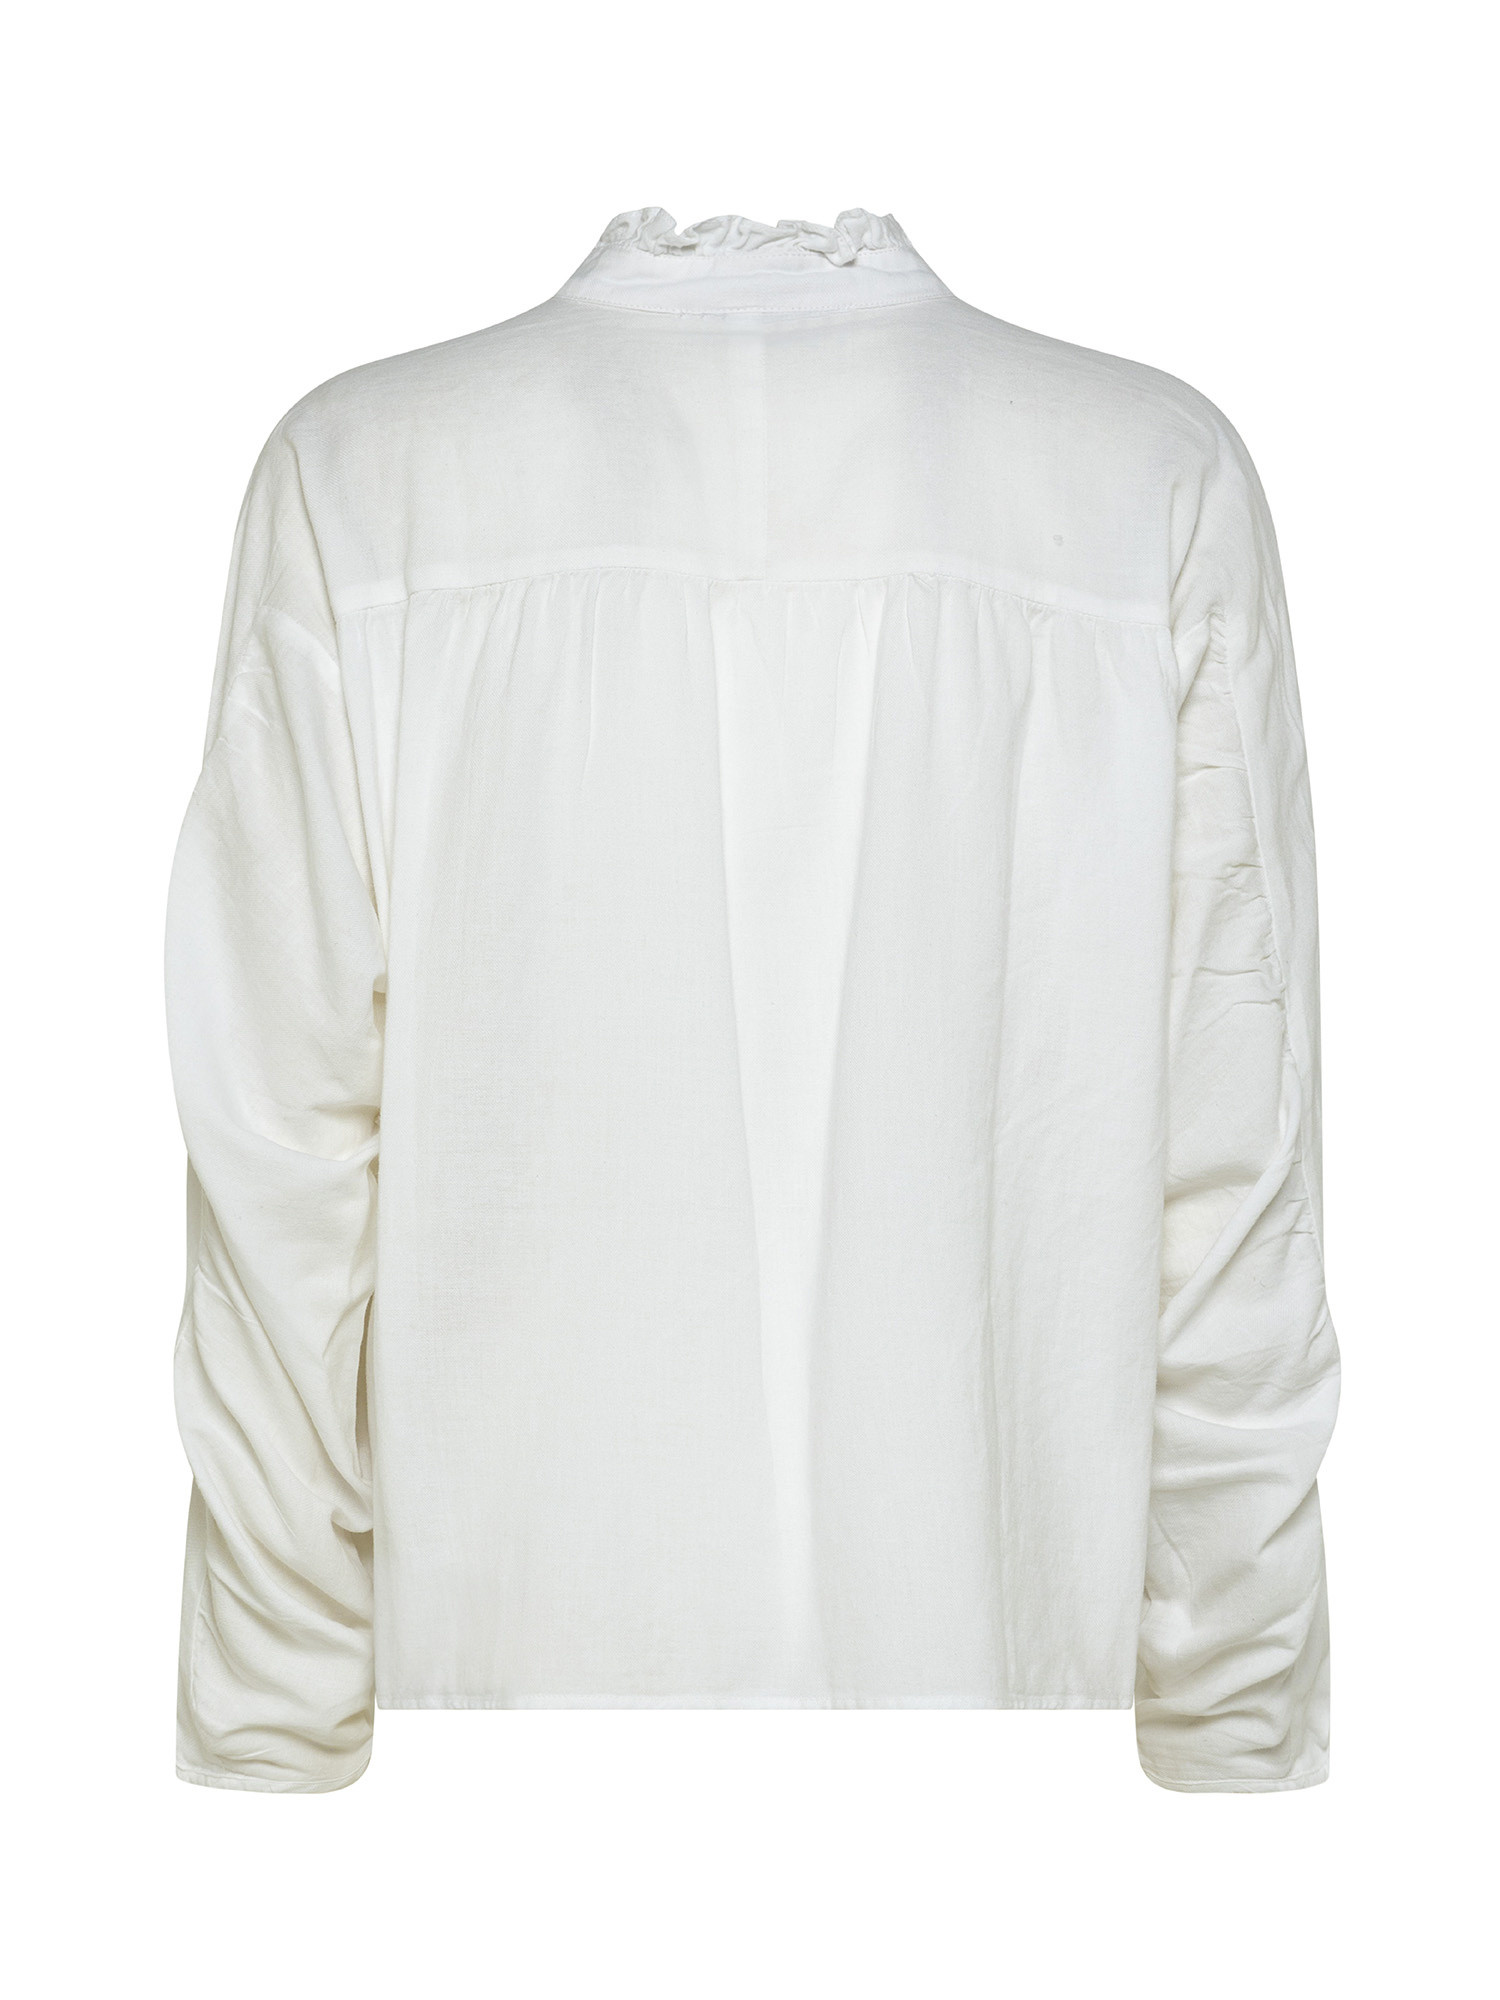 Blouse in cotton with long sleeves, White, large image number 1